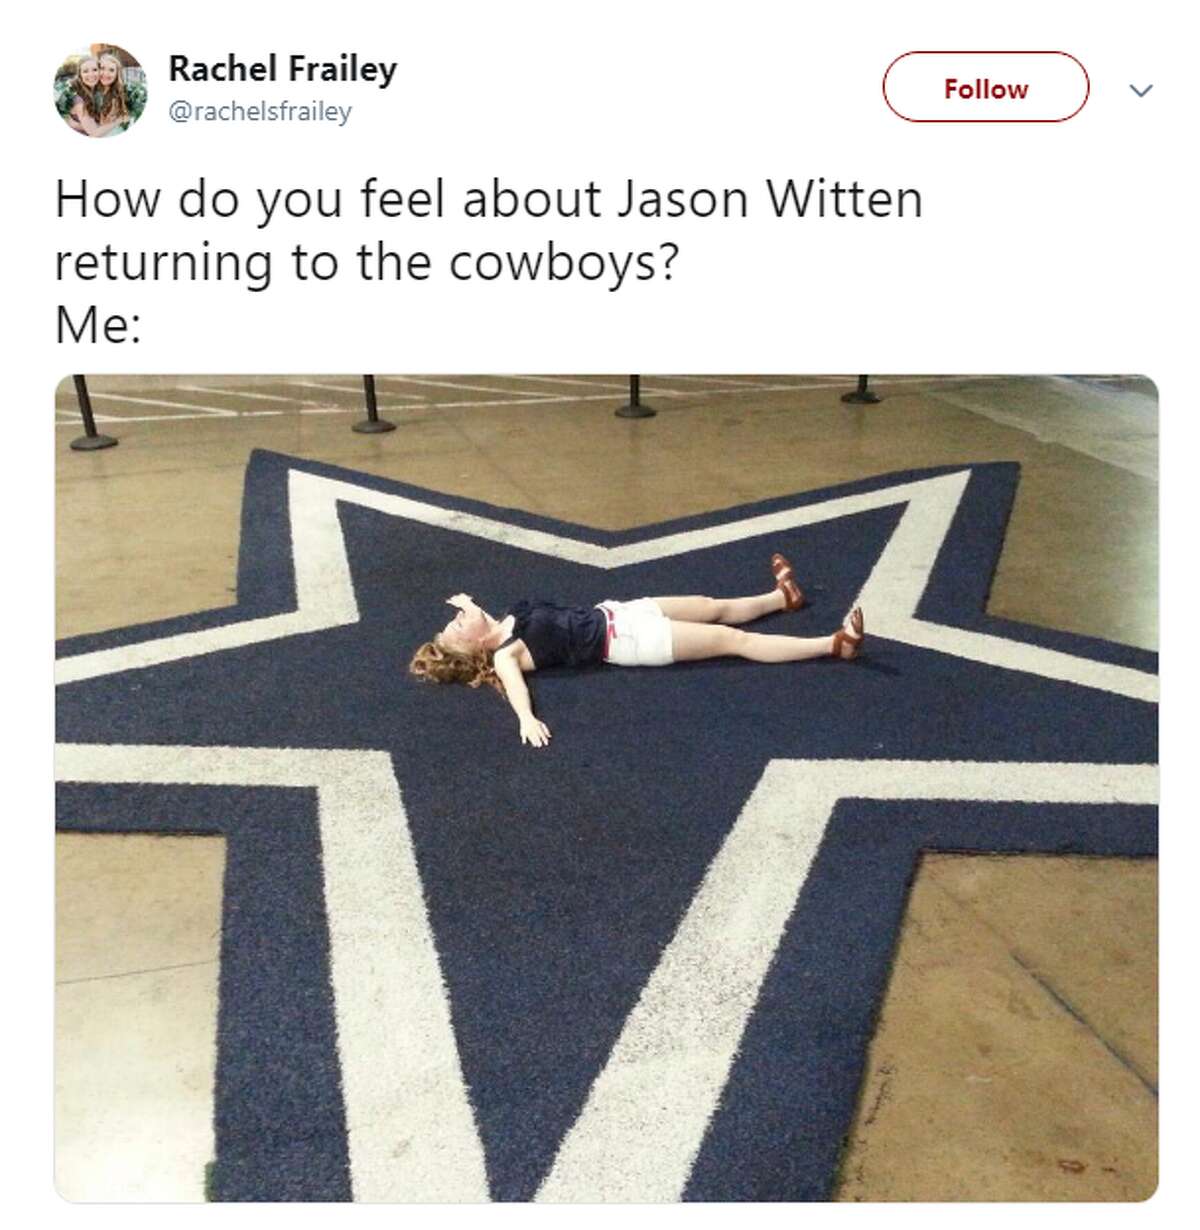 Social media exploded after Jason Witten announced his return to the Dallas Cowboys.